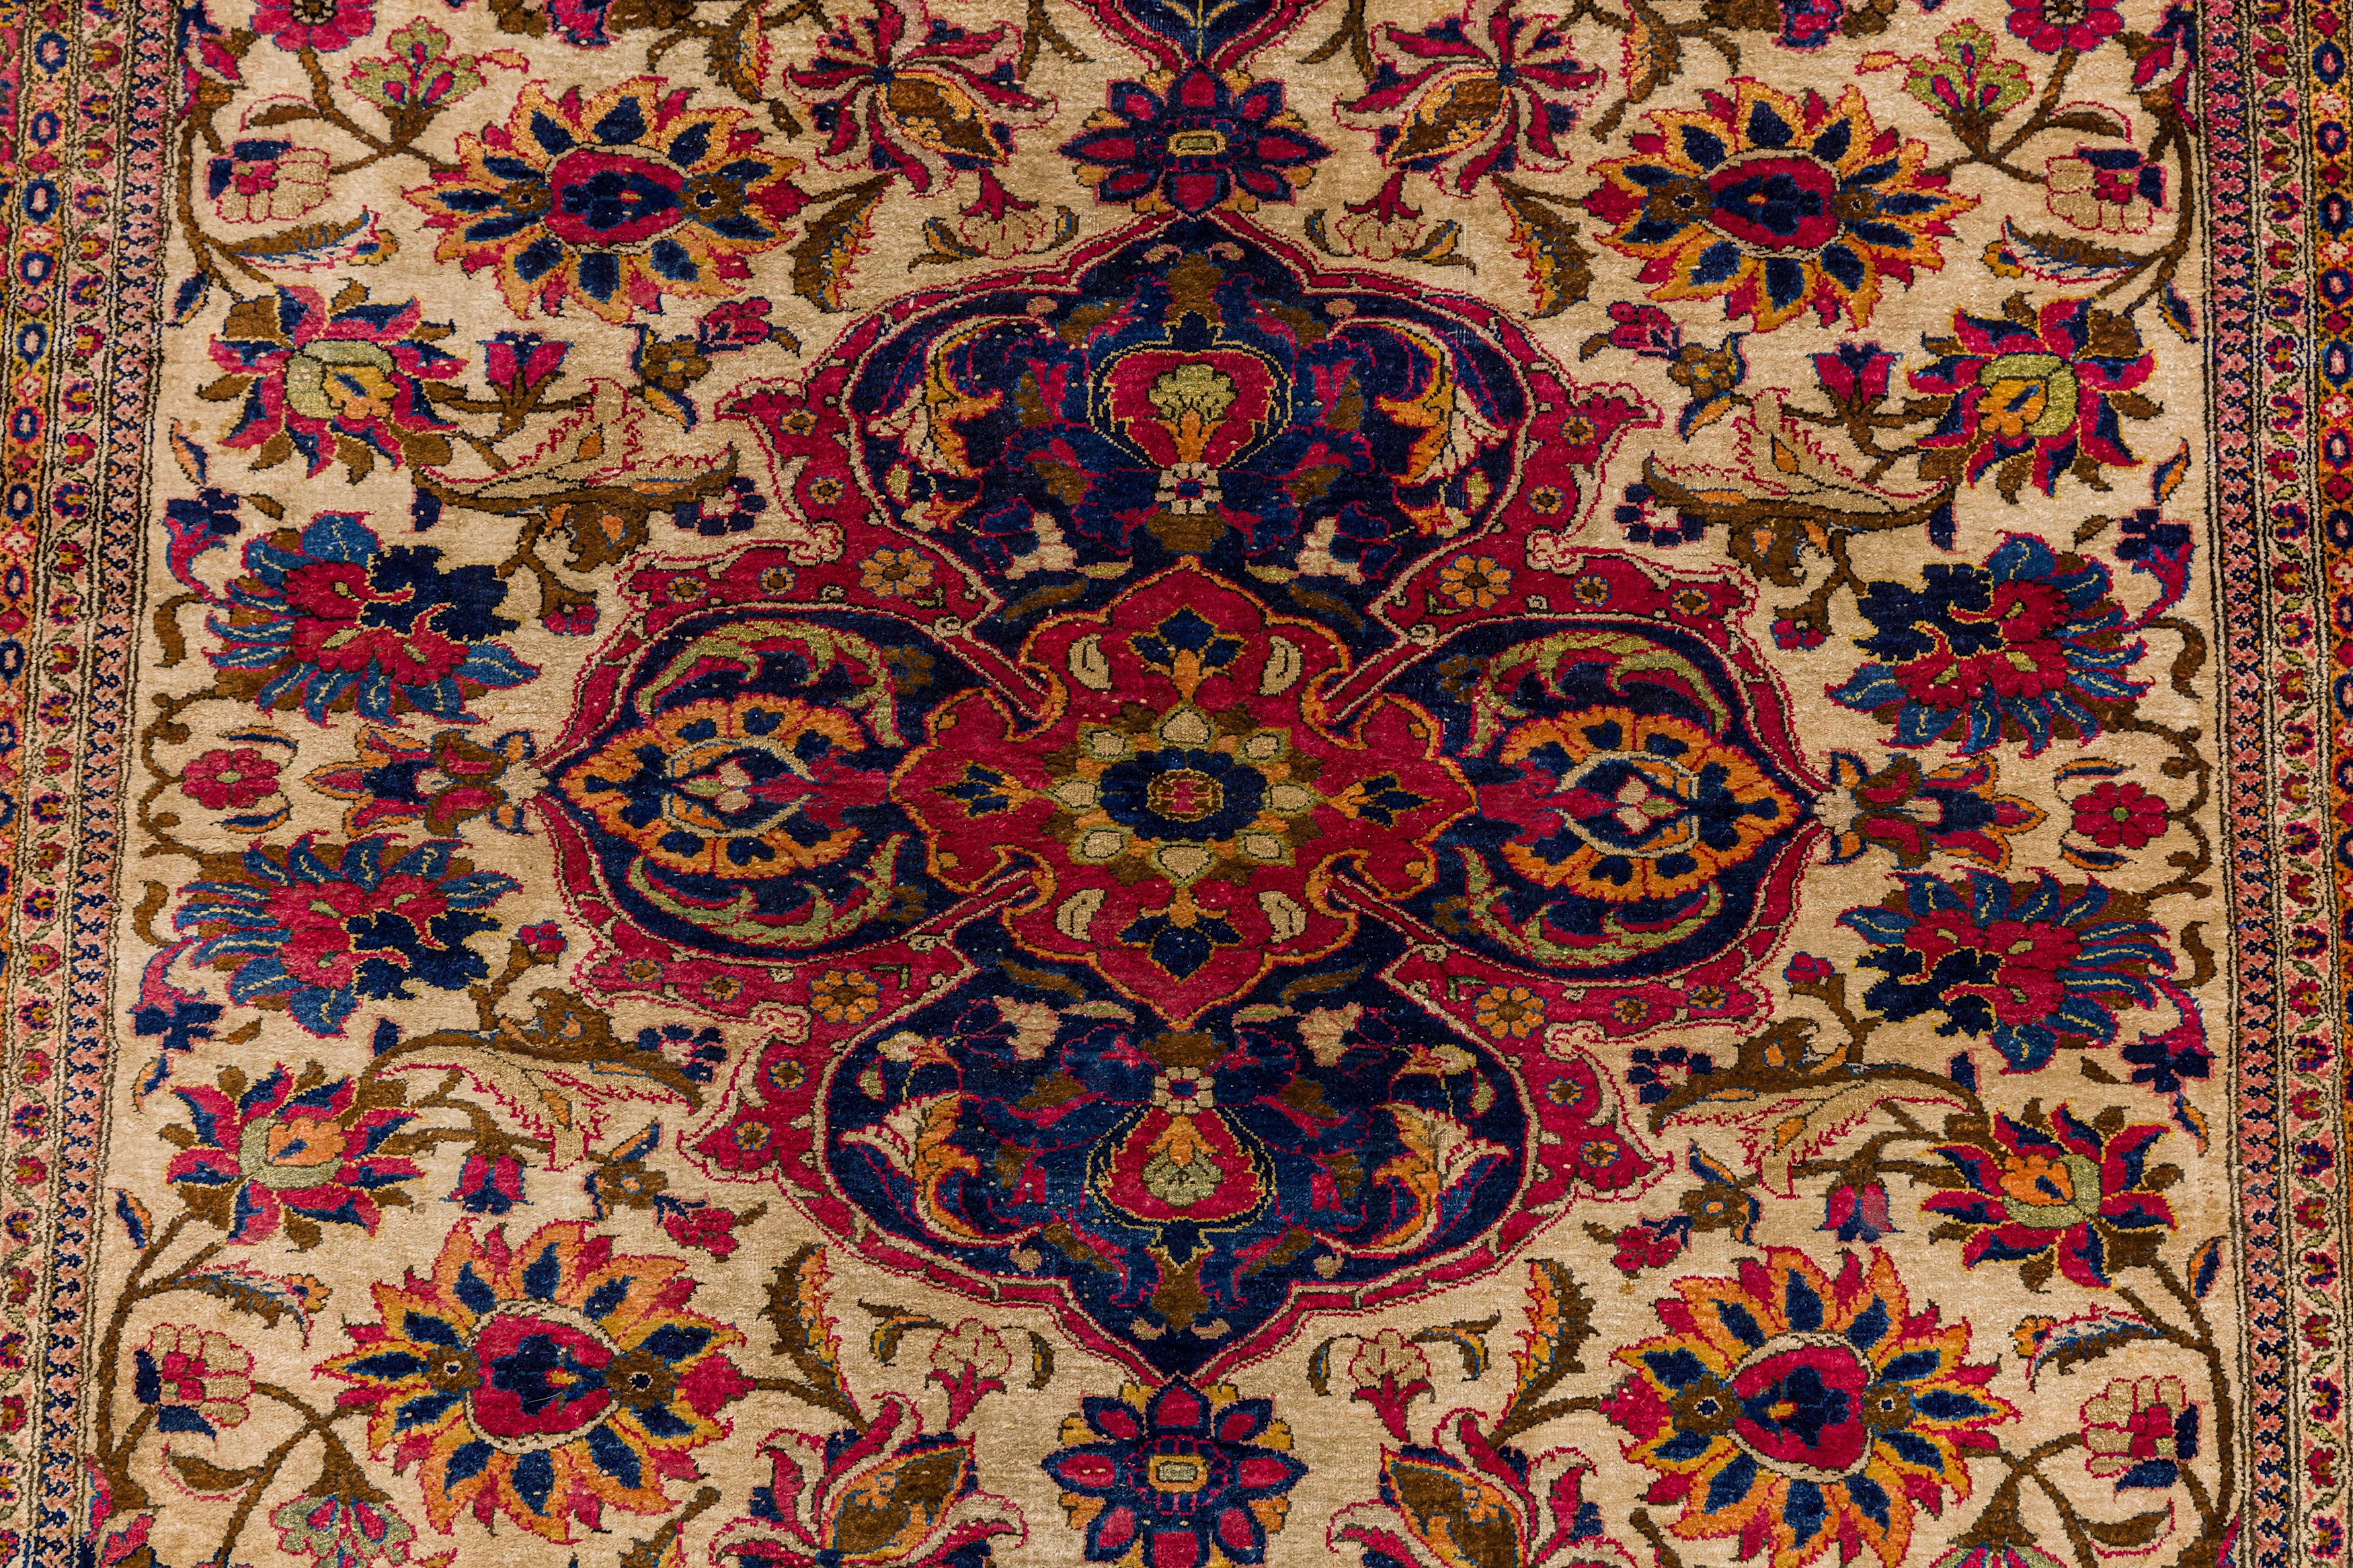 A VERY FINE SILK KASHAN RUG, CENTRAL PERSIA - Image 4 of 8